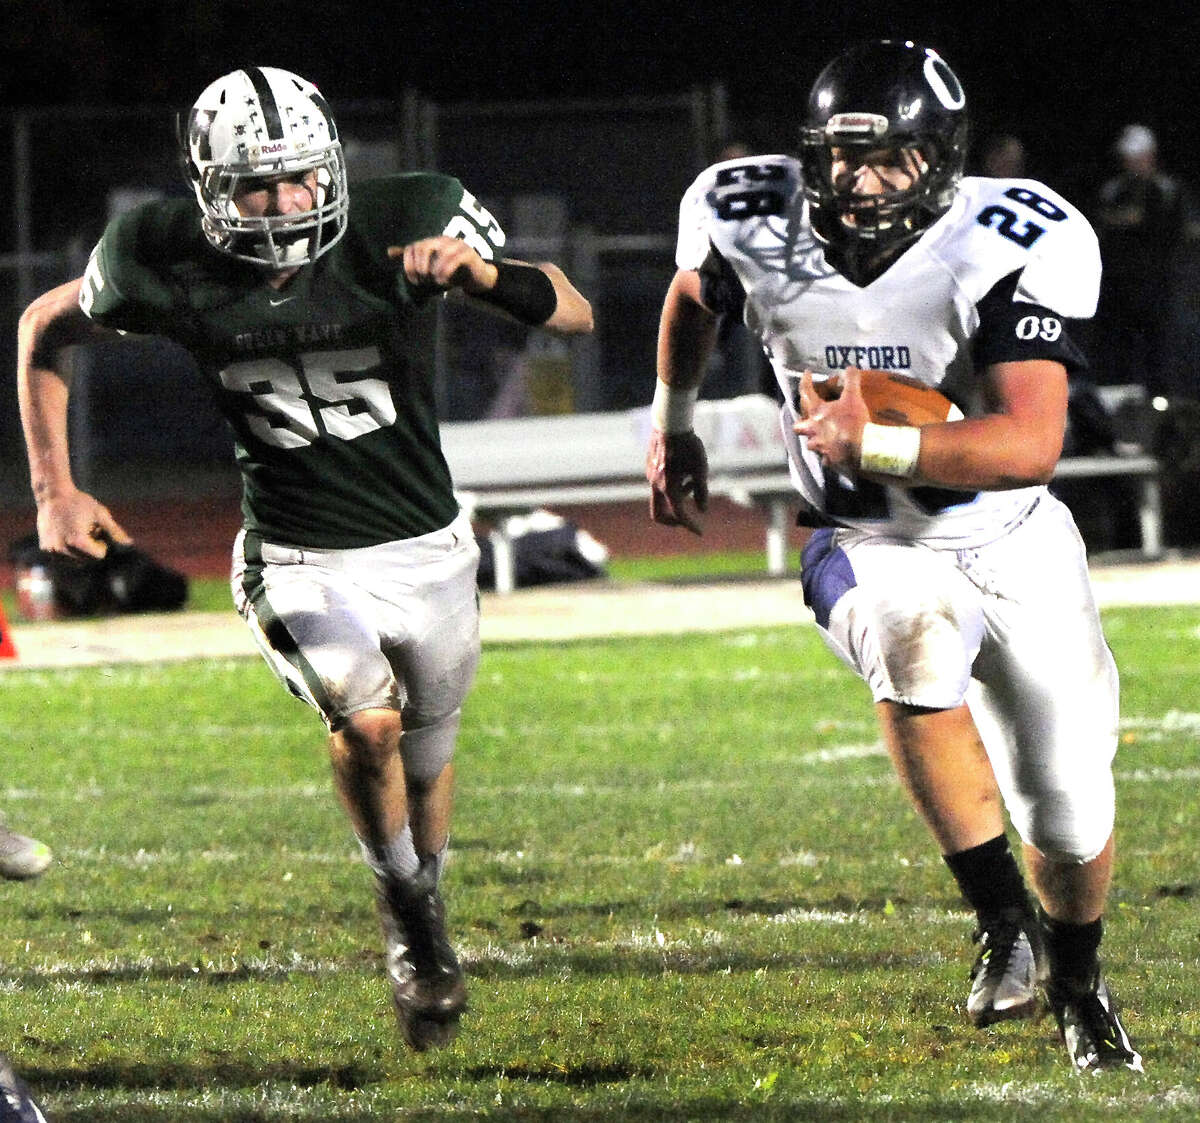 Marcus Esteves carries the ball for a touchdown as Oxford plays football at New Milford Monday, Oct. 22, 2012.